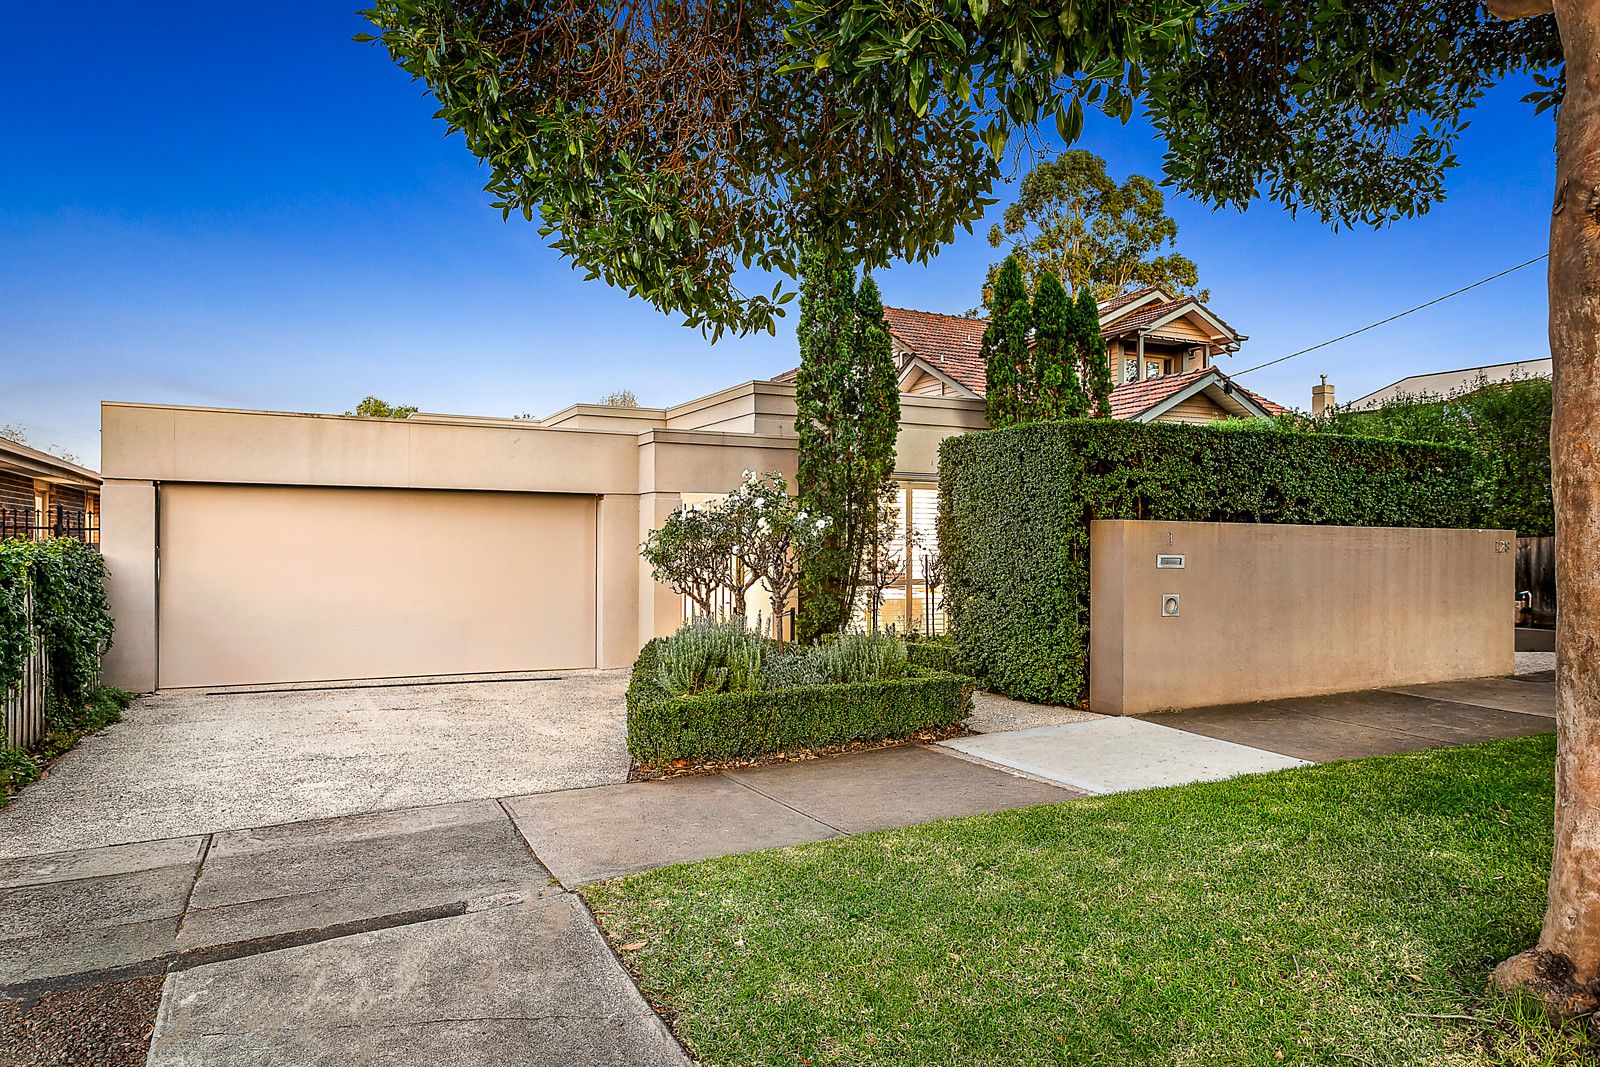 1/128 Normanby Road, Kew East VIC 3102, Image 0